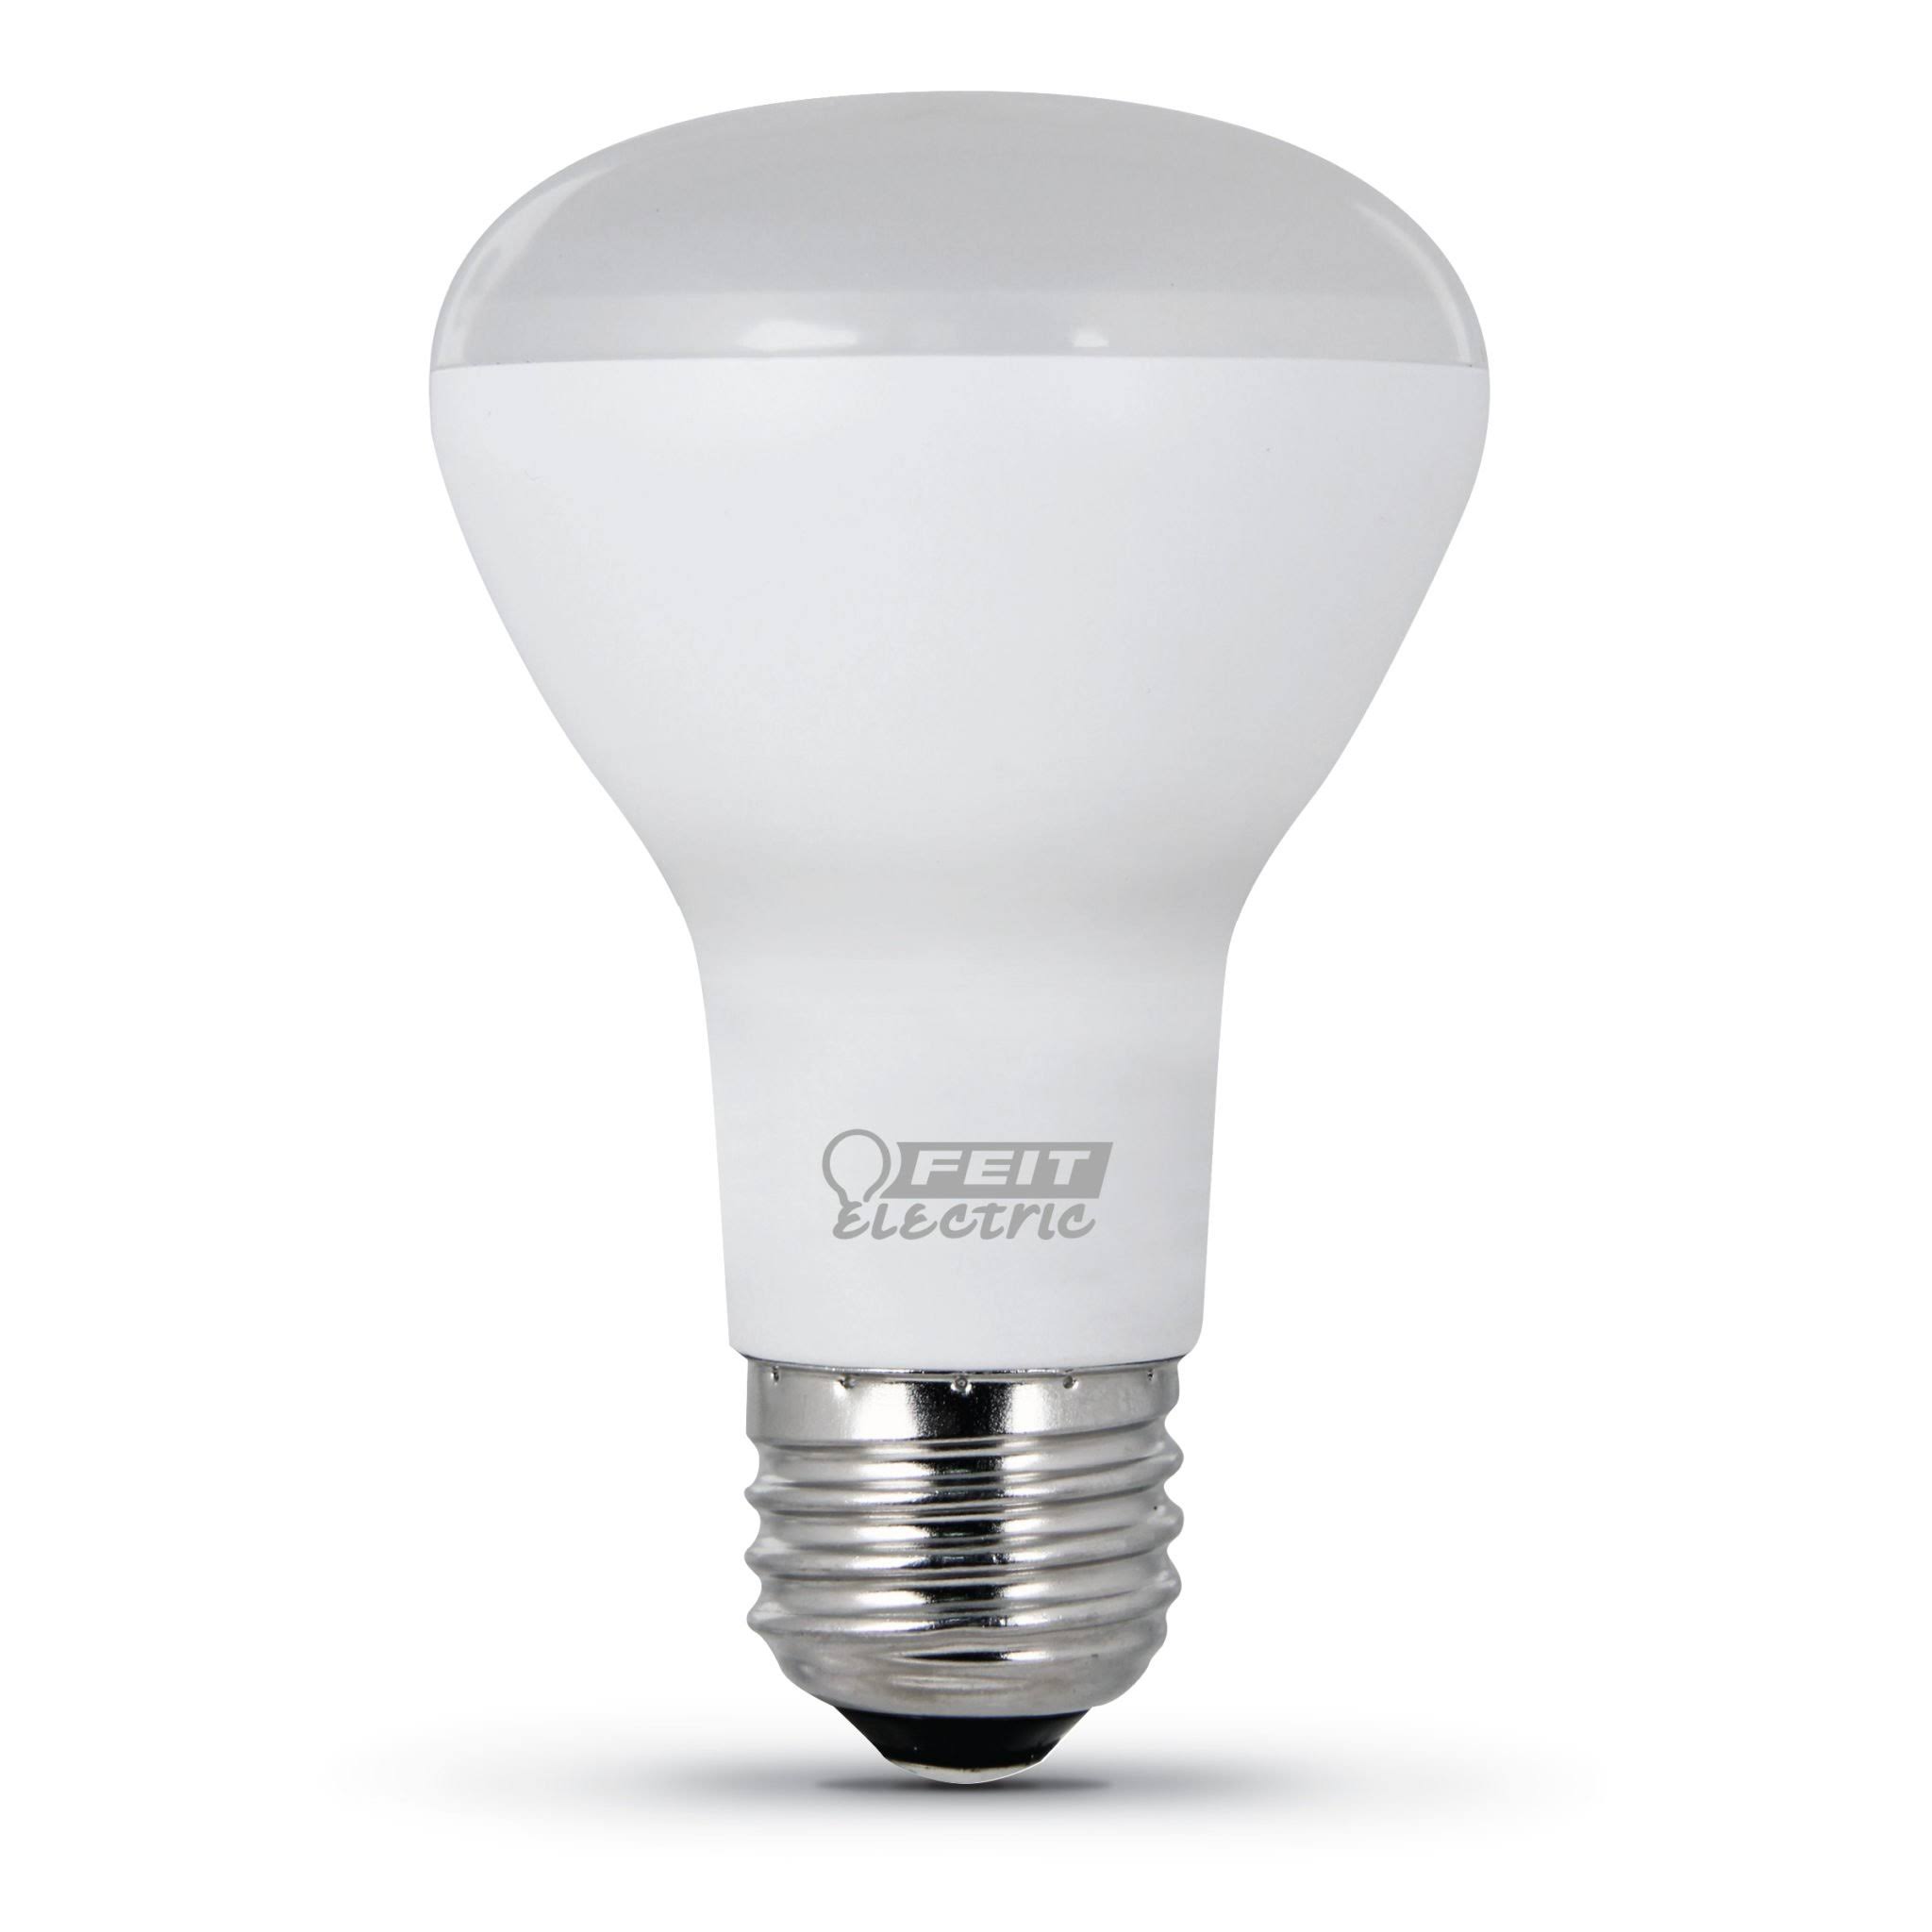 Feit Electric R20 Dimmable CEC LED Energy Star Bulb - 45w